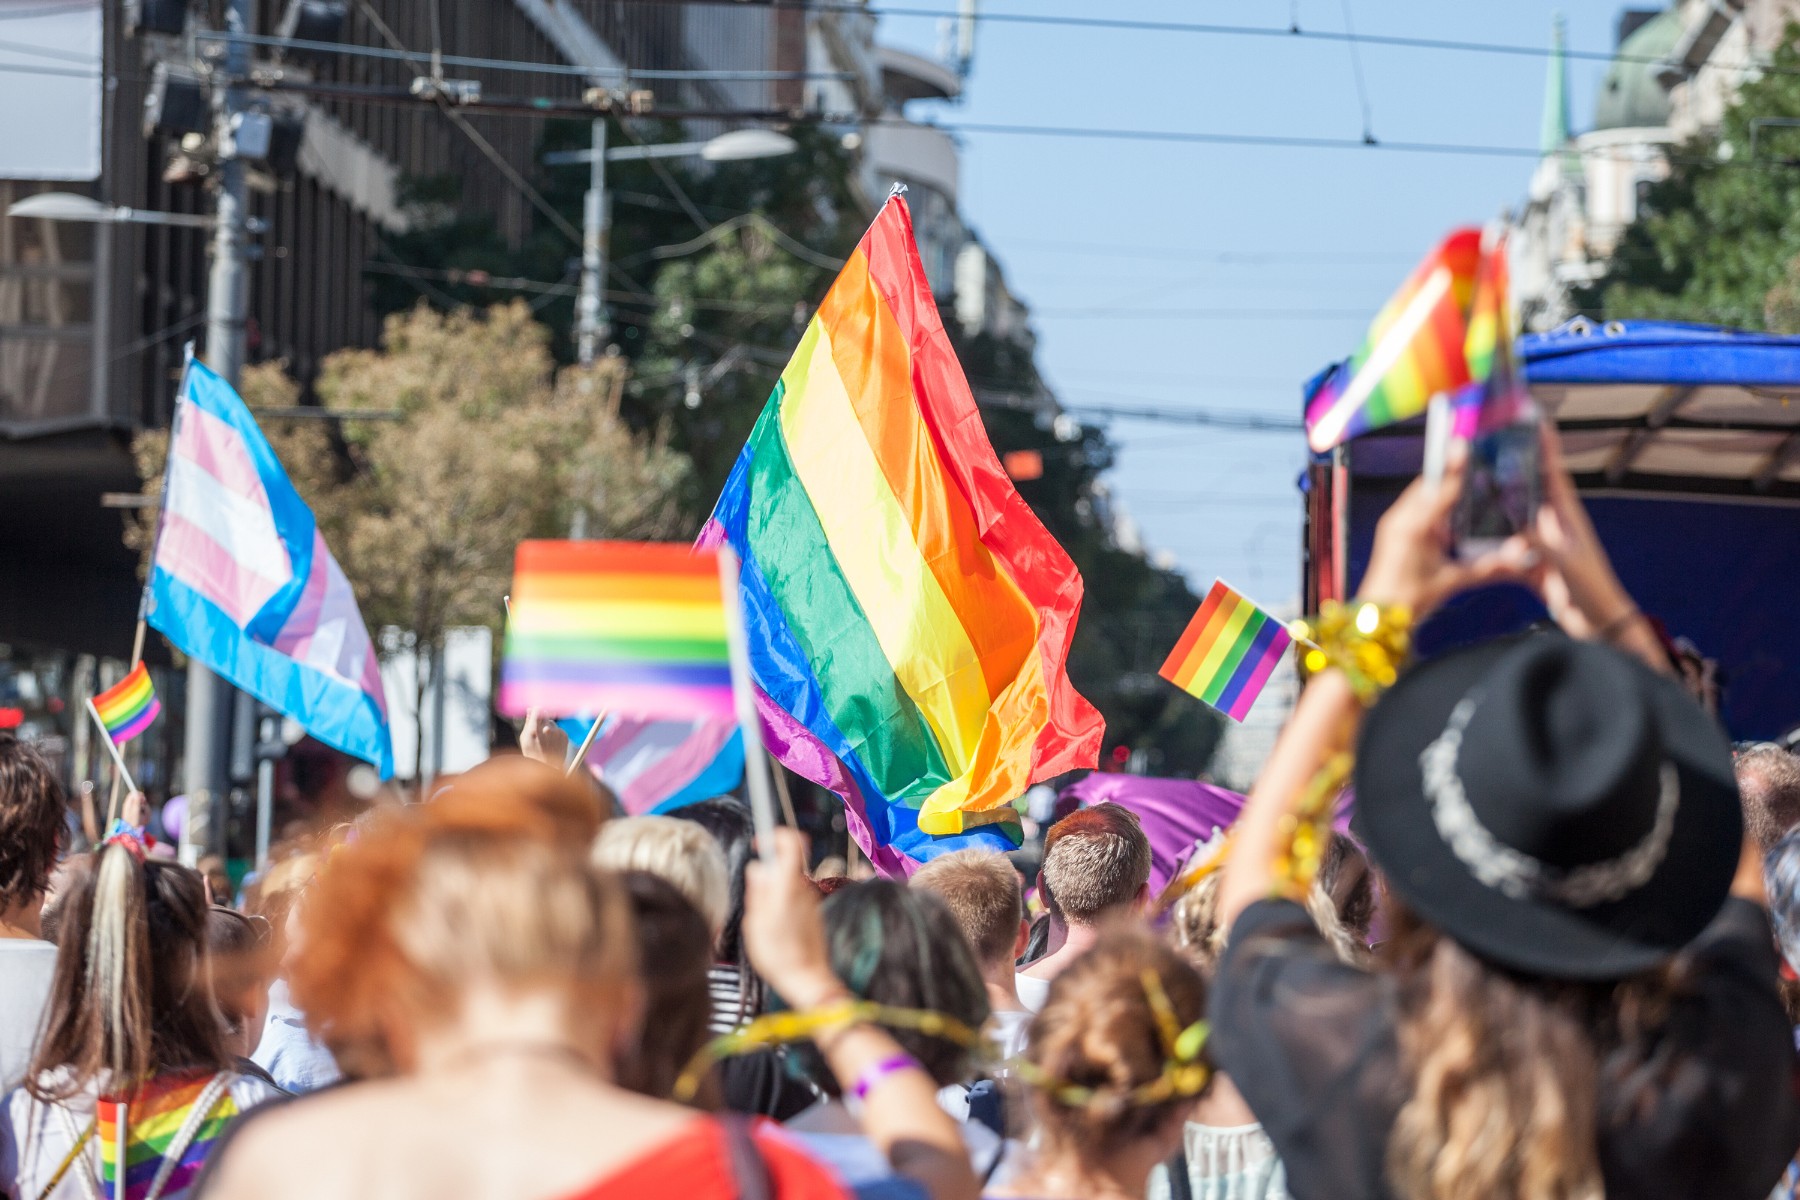 Rainbow flags being waved in a crowd of marching people.